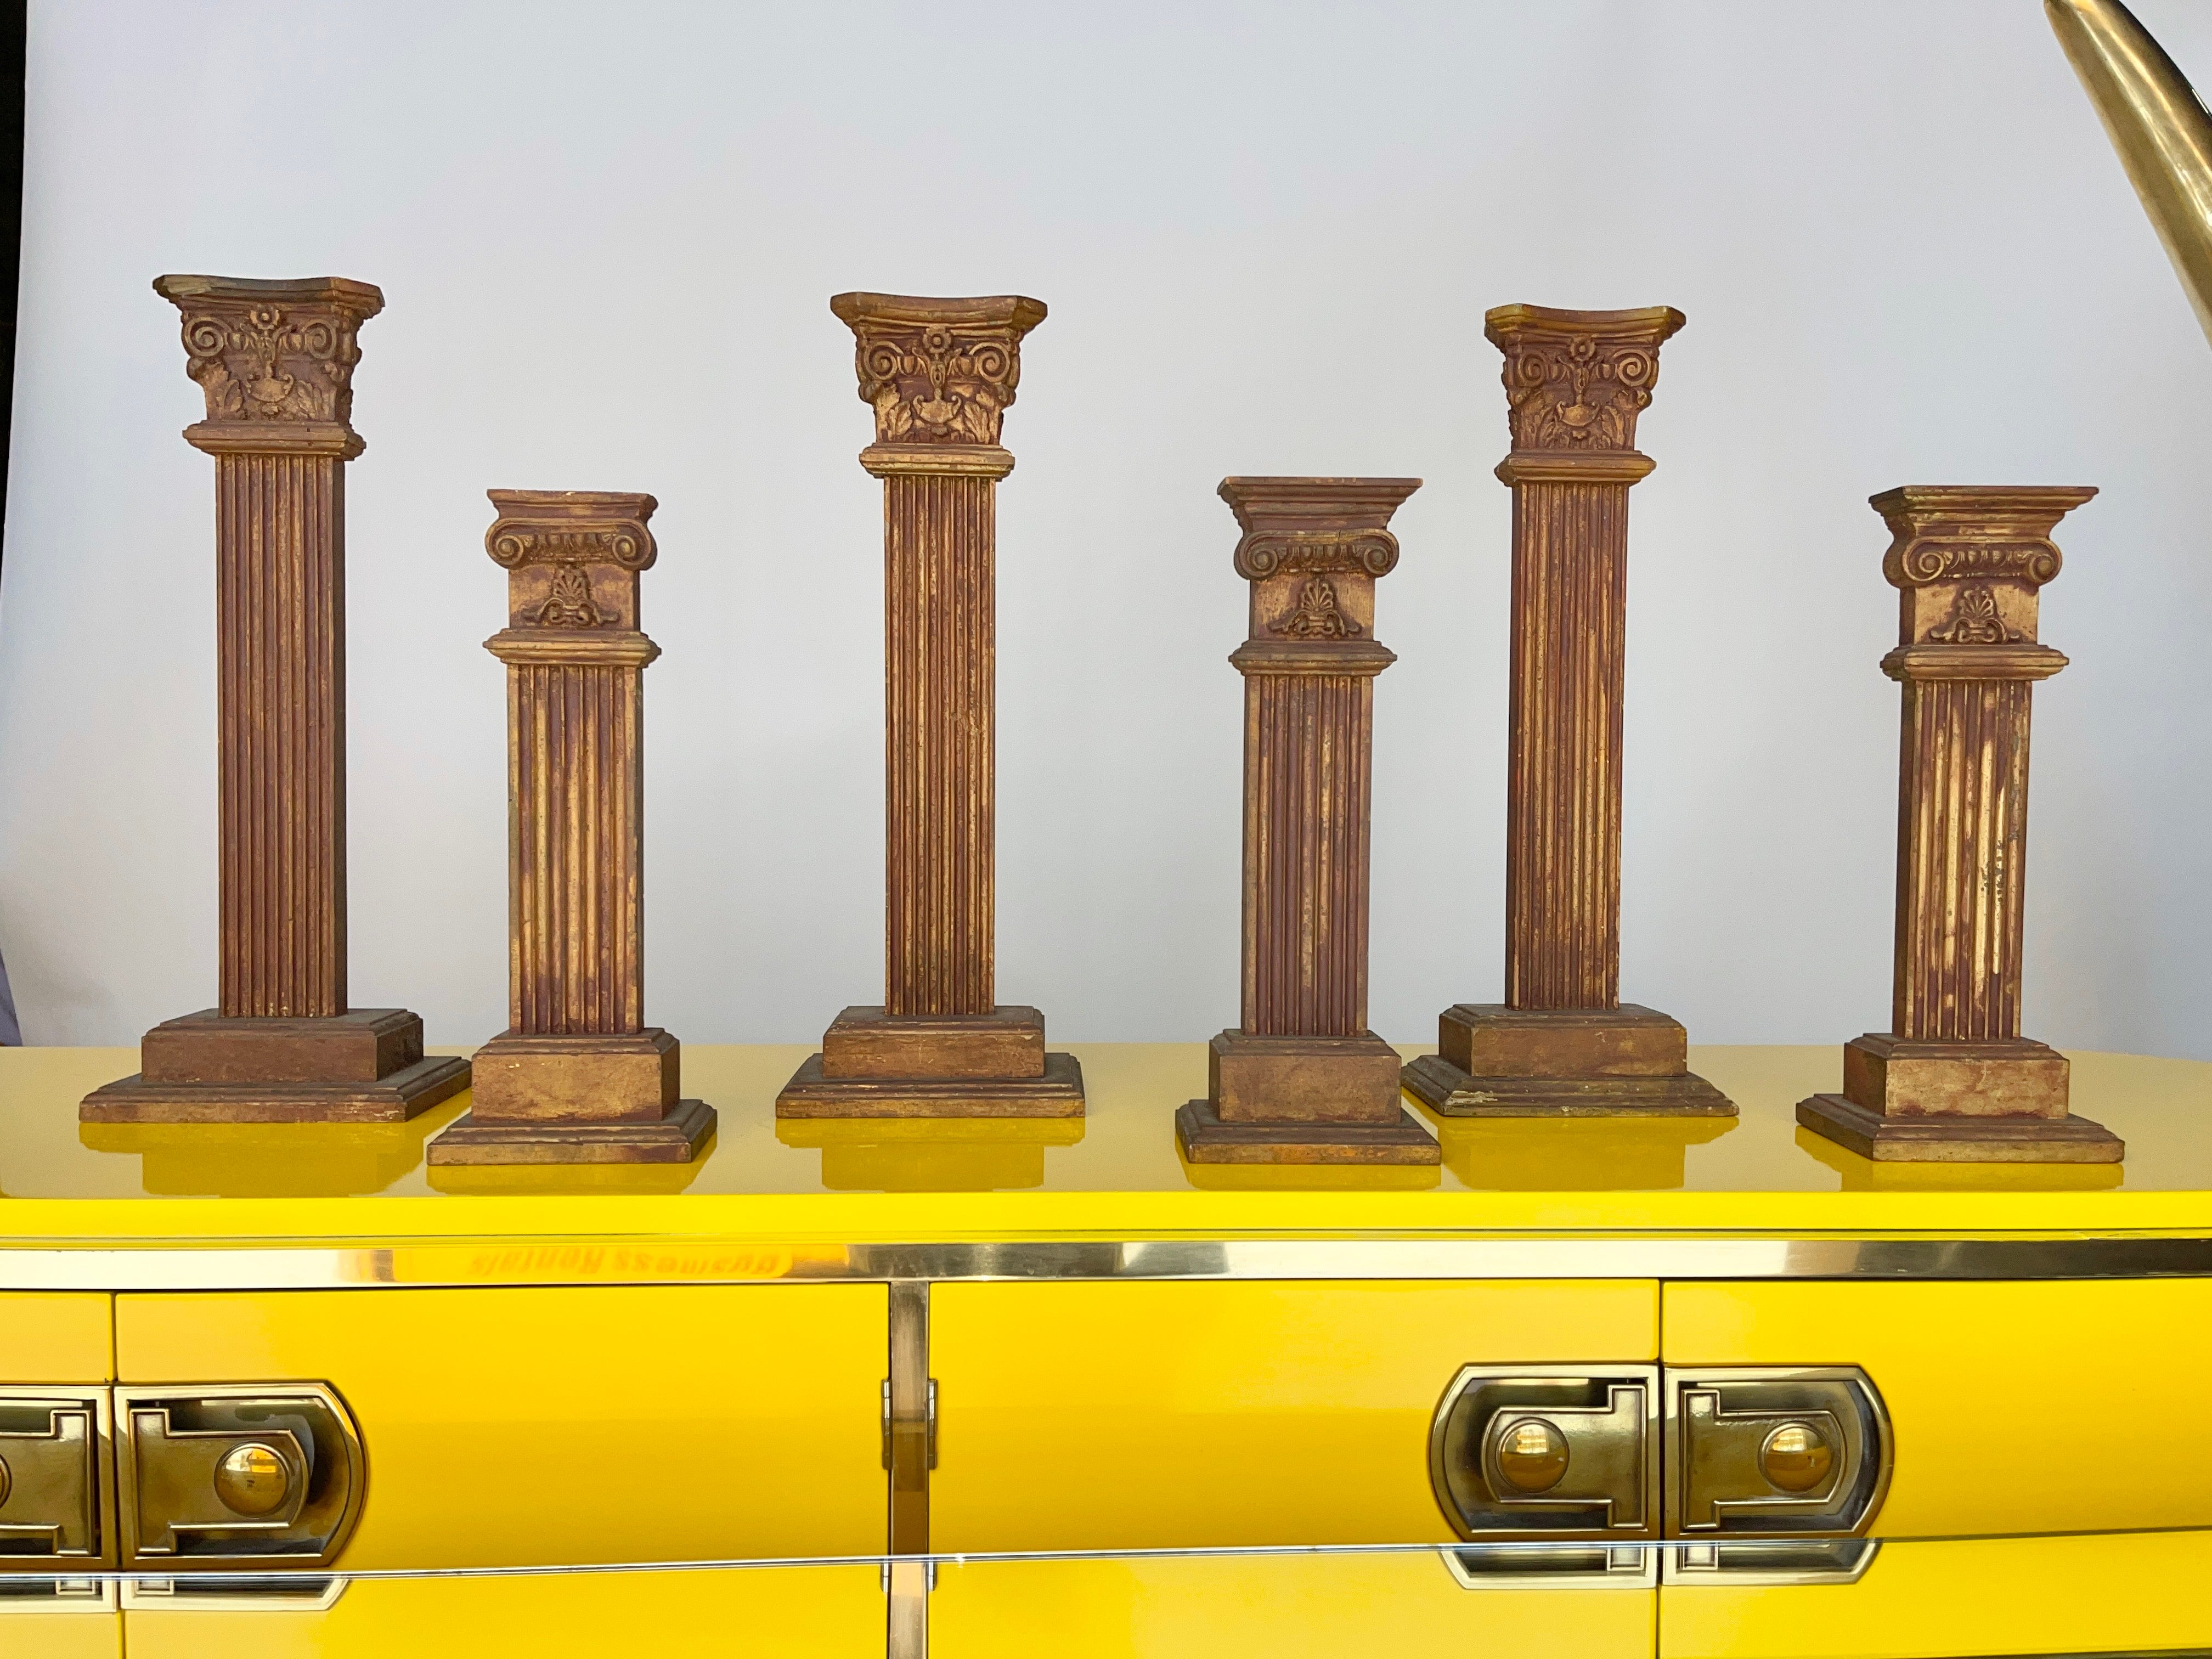 Set of six decorative Ionic and Corinthian columns made of carved wood that has been accentuated with bronze colored leaf.
These were used as merchandising display props at Boston’s legendary jeweler Shreve Crump & Low.

The three taller ones are